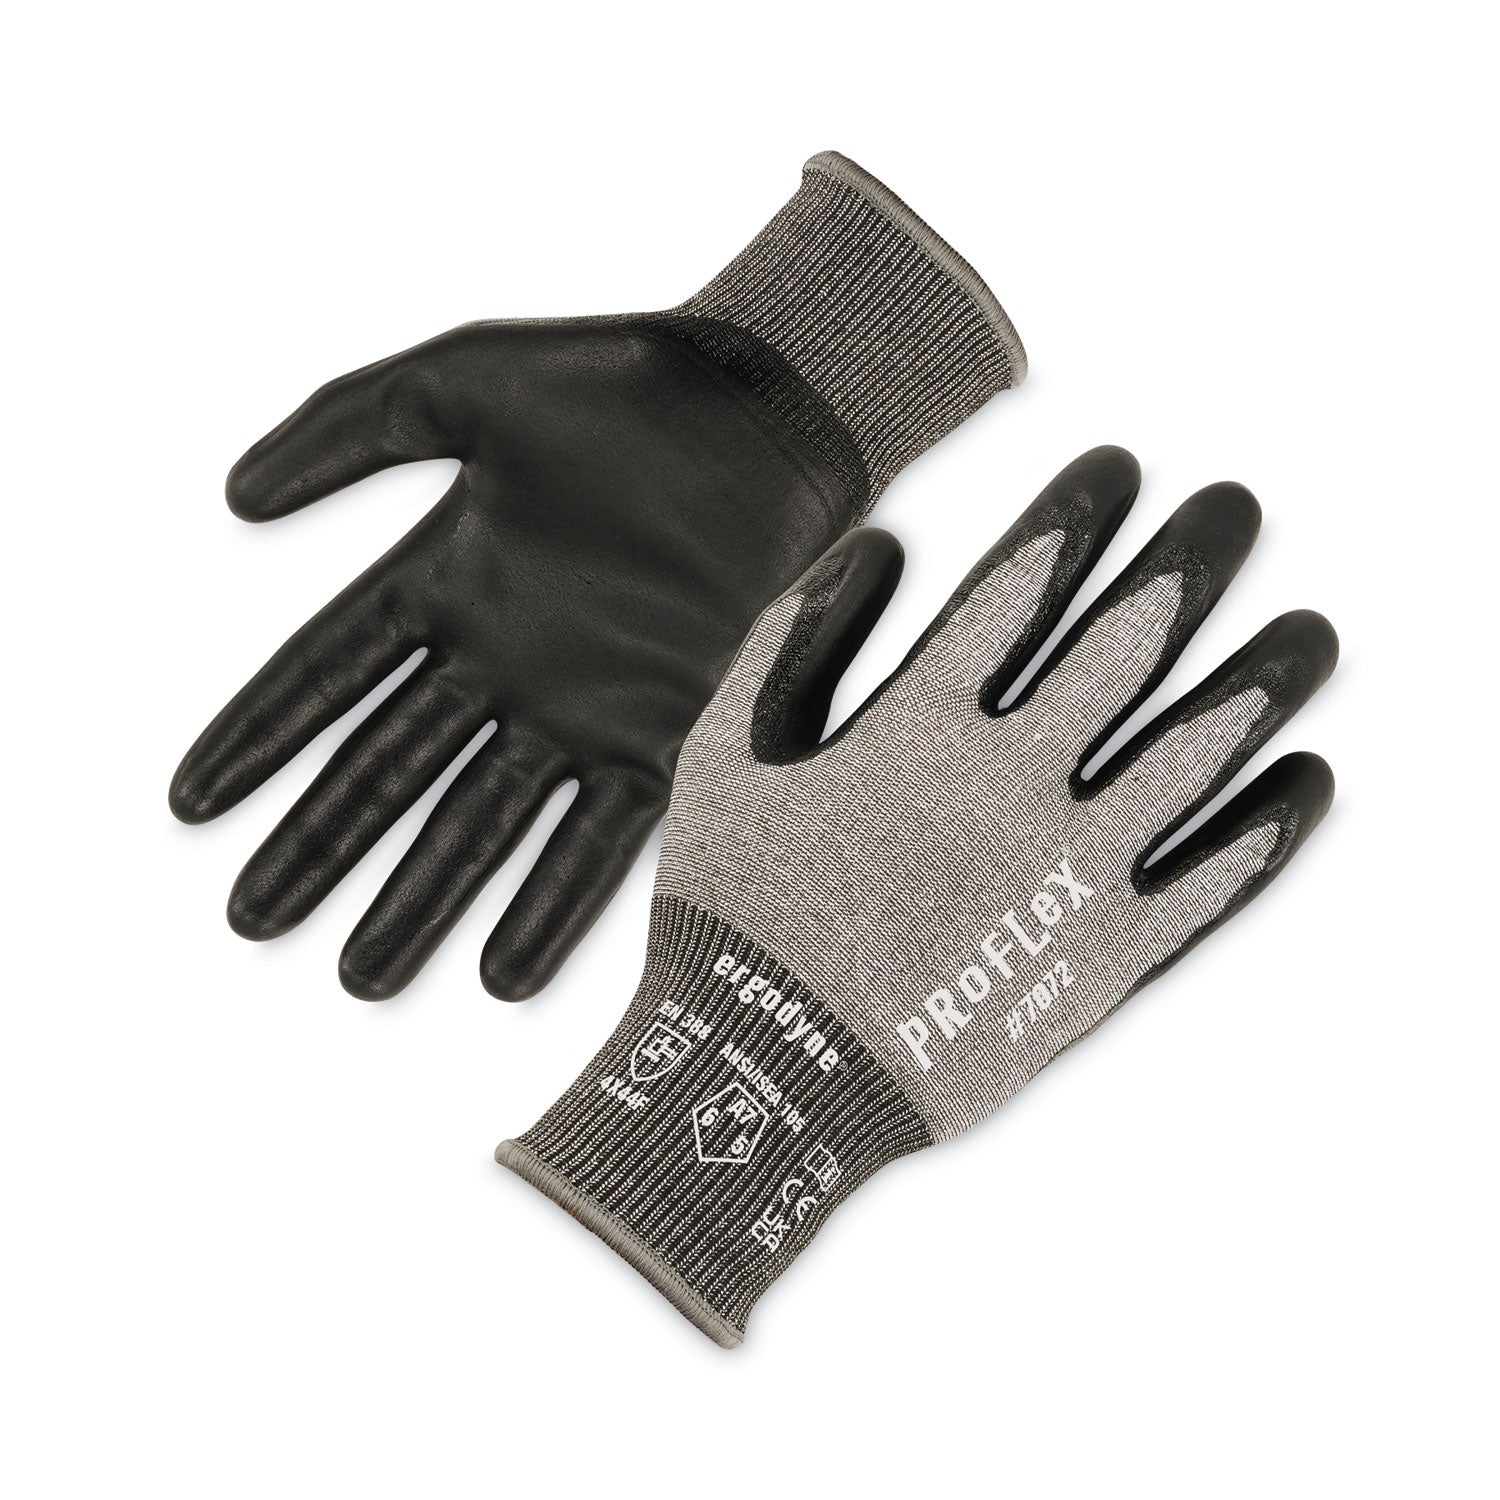 proflex-7072-ansi-a7-nitrile-coated-cr-gloves-gray-medium-12-pairs-pack-ships-in-1-3-business-days_ego10303 - 1